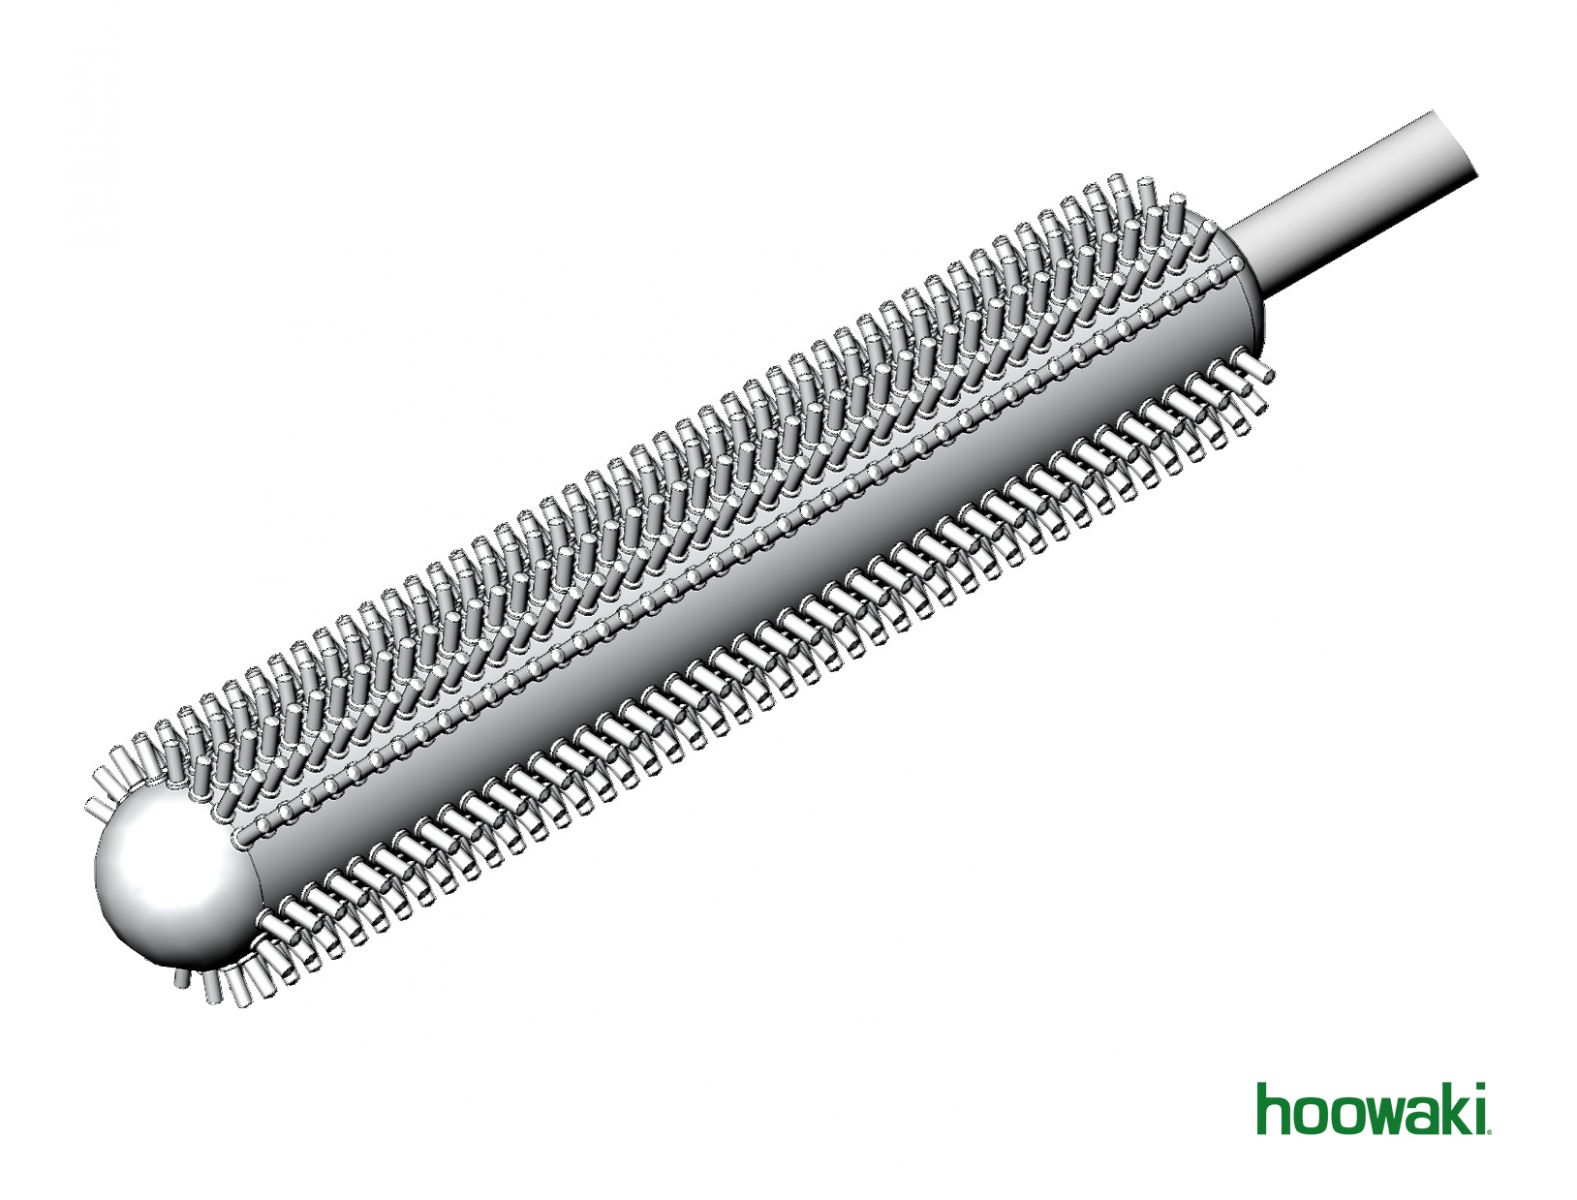 Hoowaki will use its specialty in micro surface engineering to manufacture millions of COVID-19 swabs. (Photo/Provided)